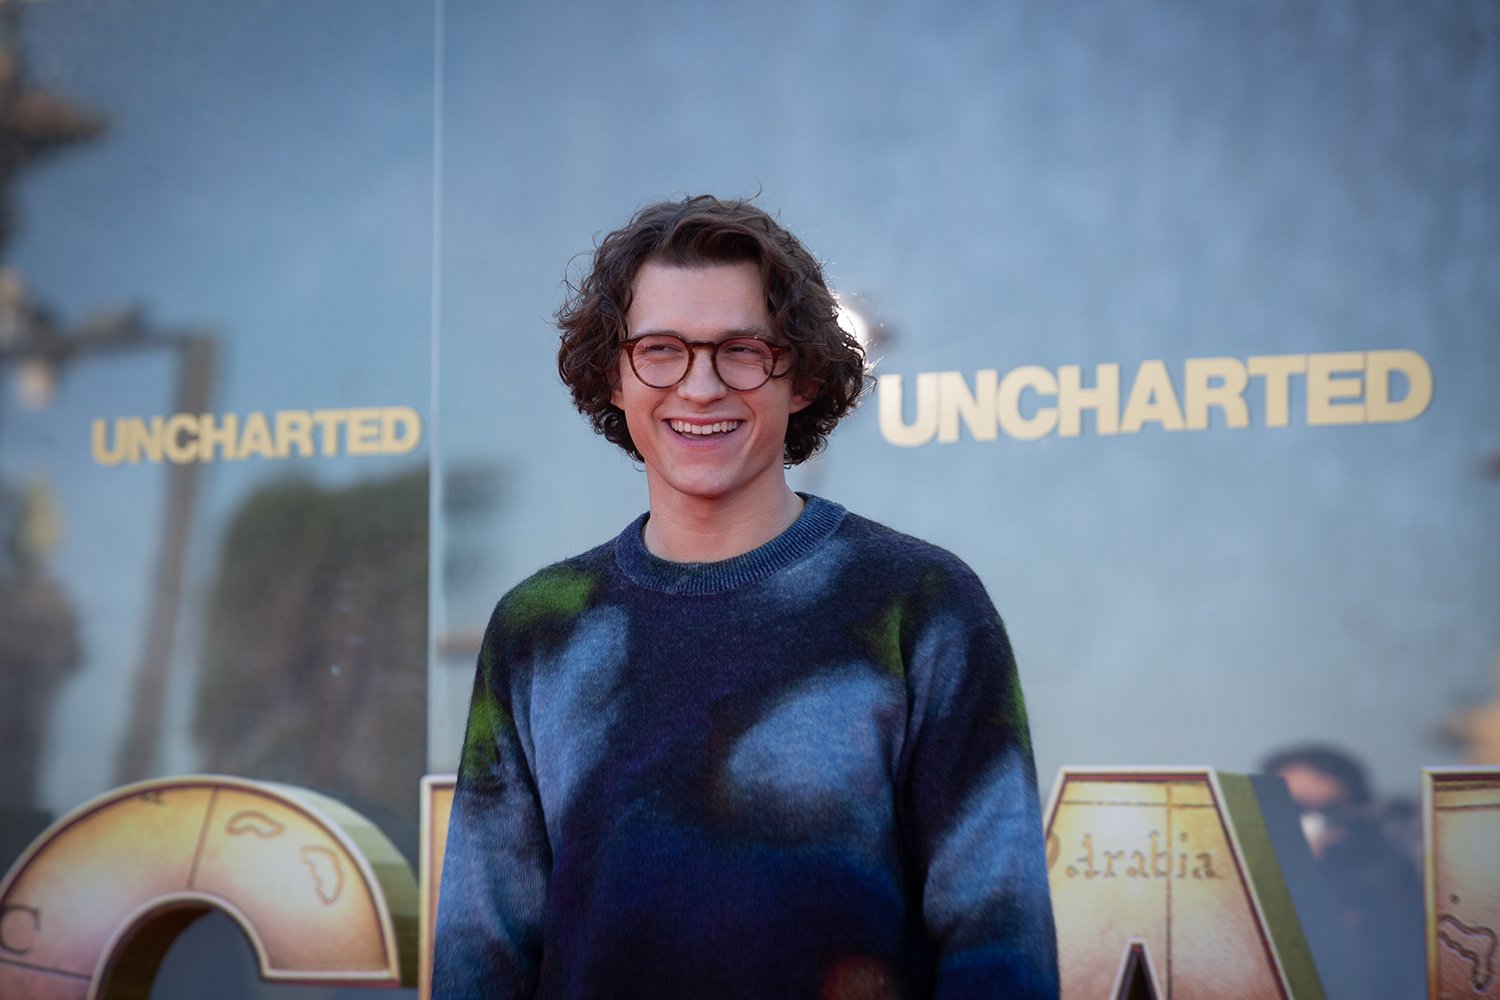 Tom Holland attends a press event for his new video game movie, Uncharted